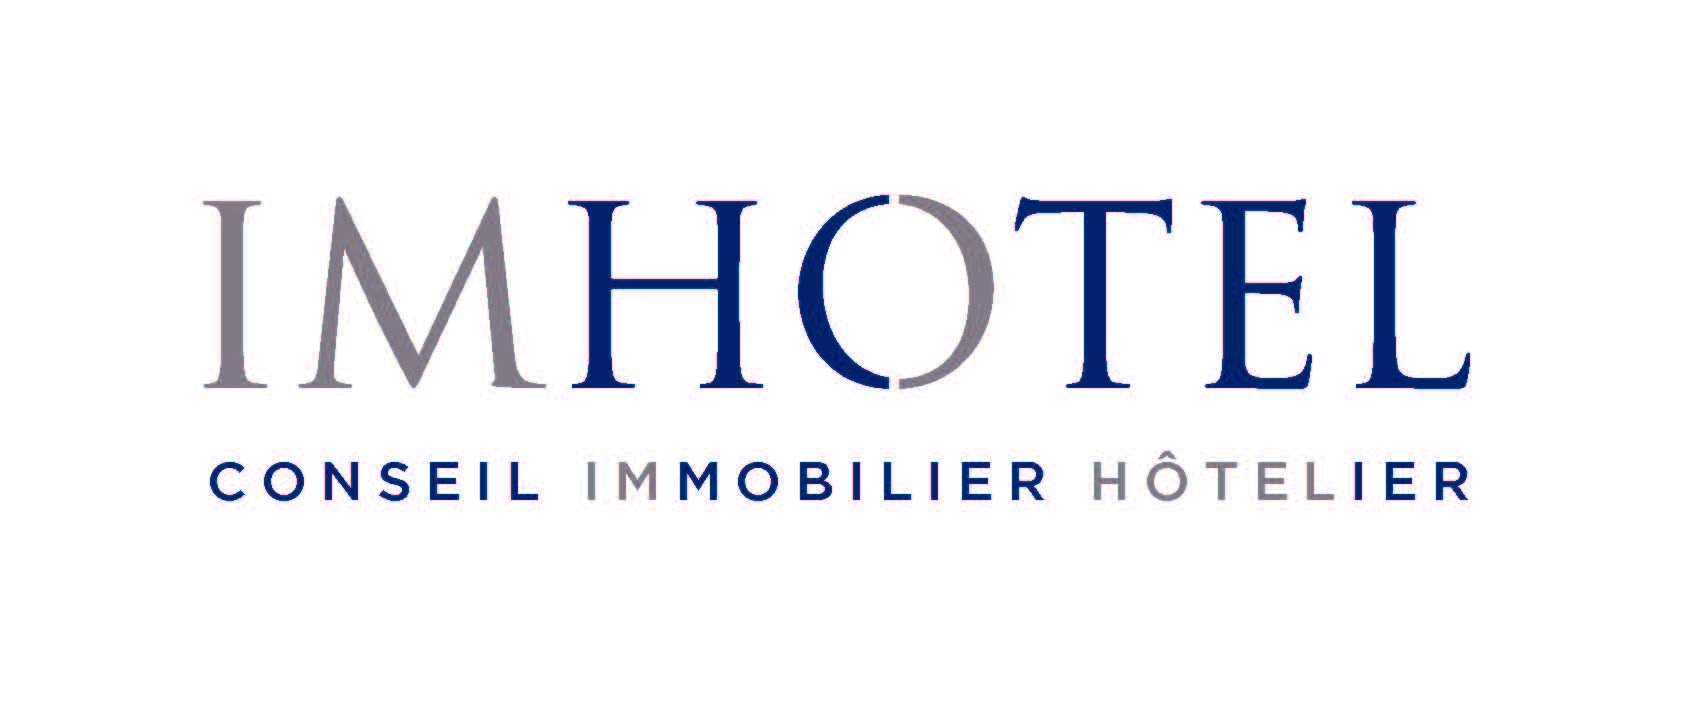 Imhotel